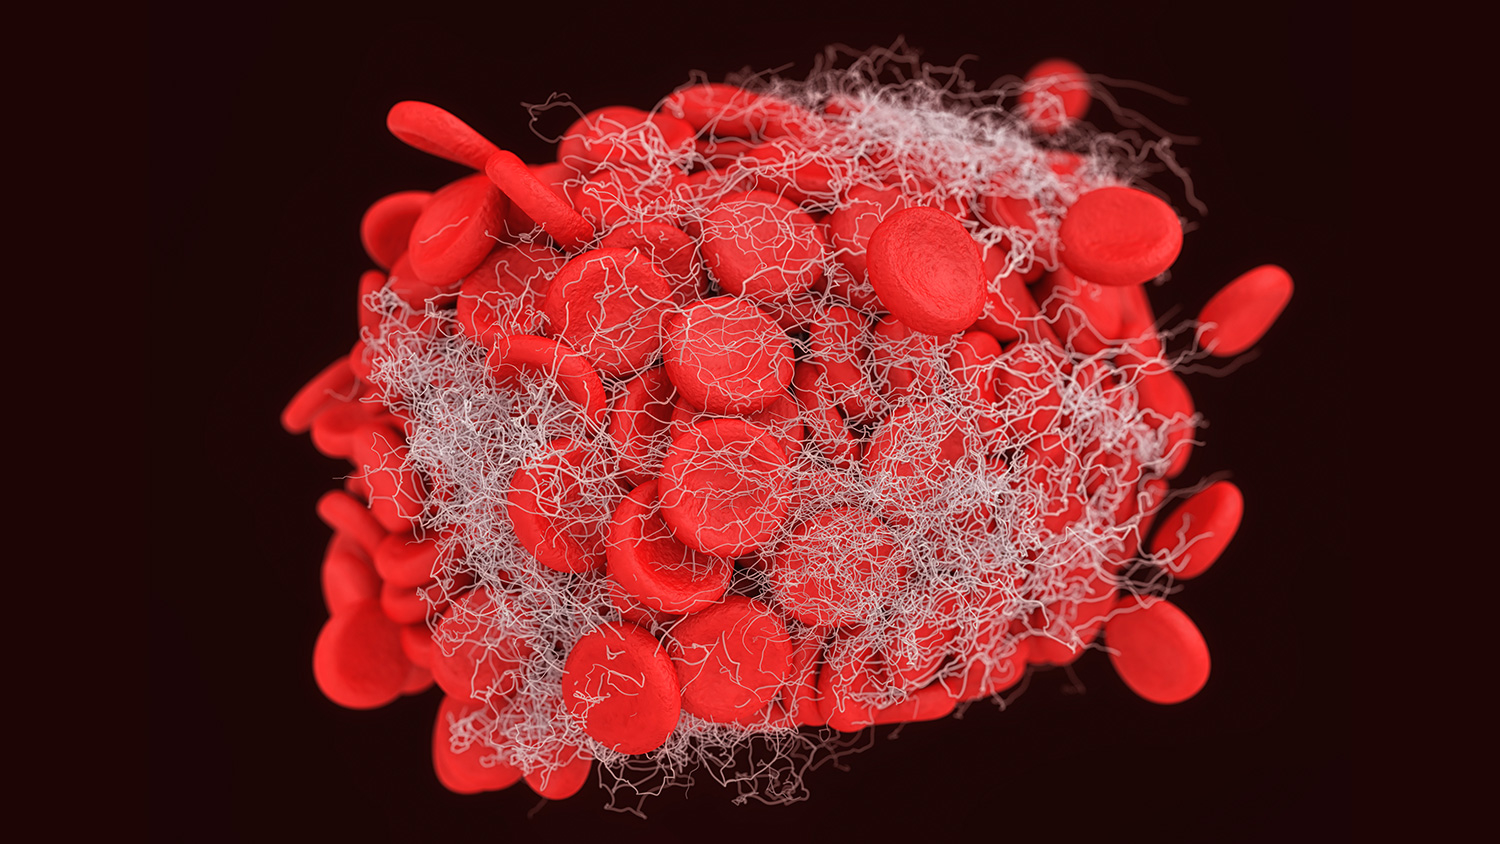 rendering of fibrin acting as a net around platelets